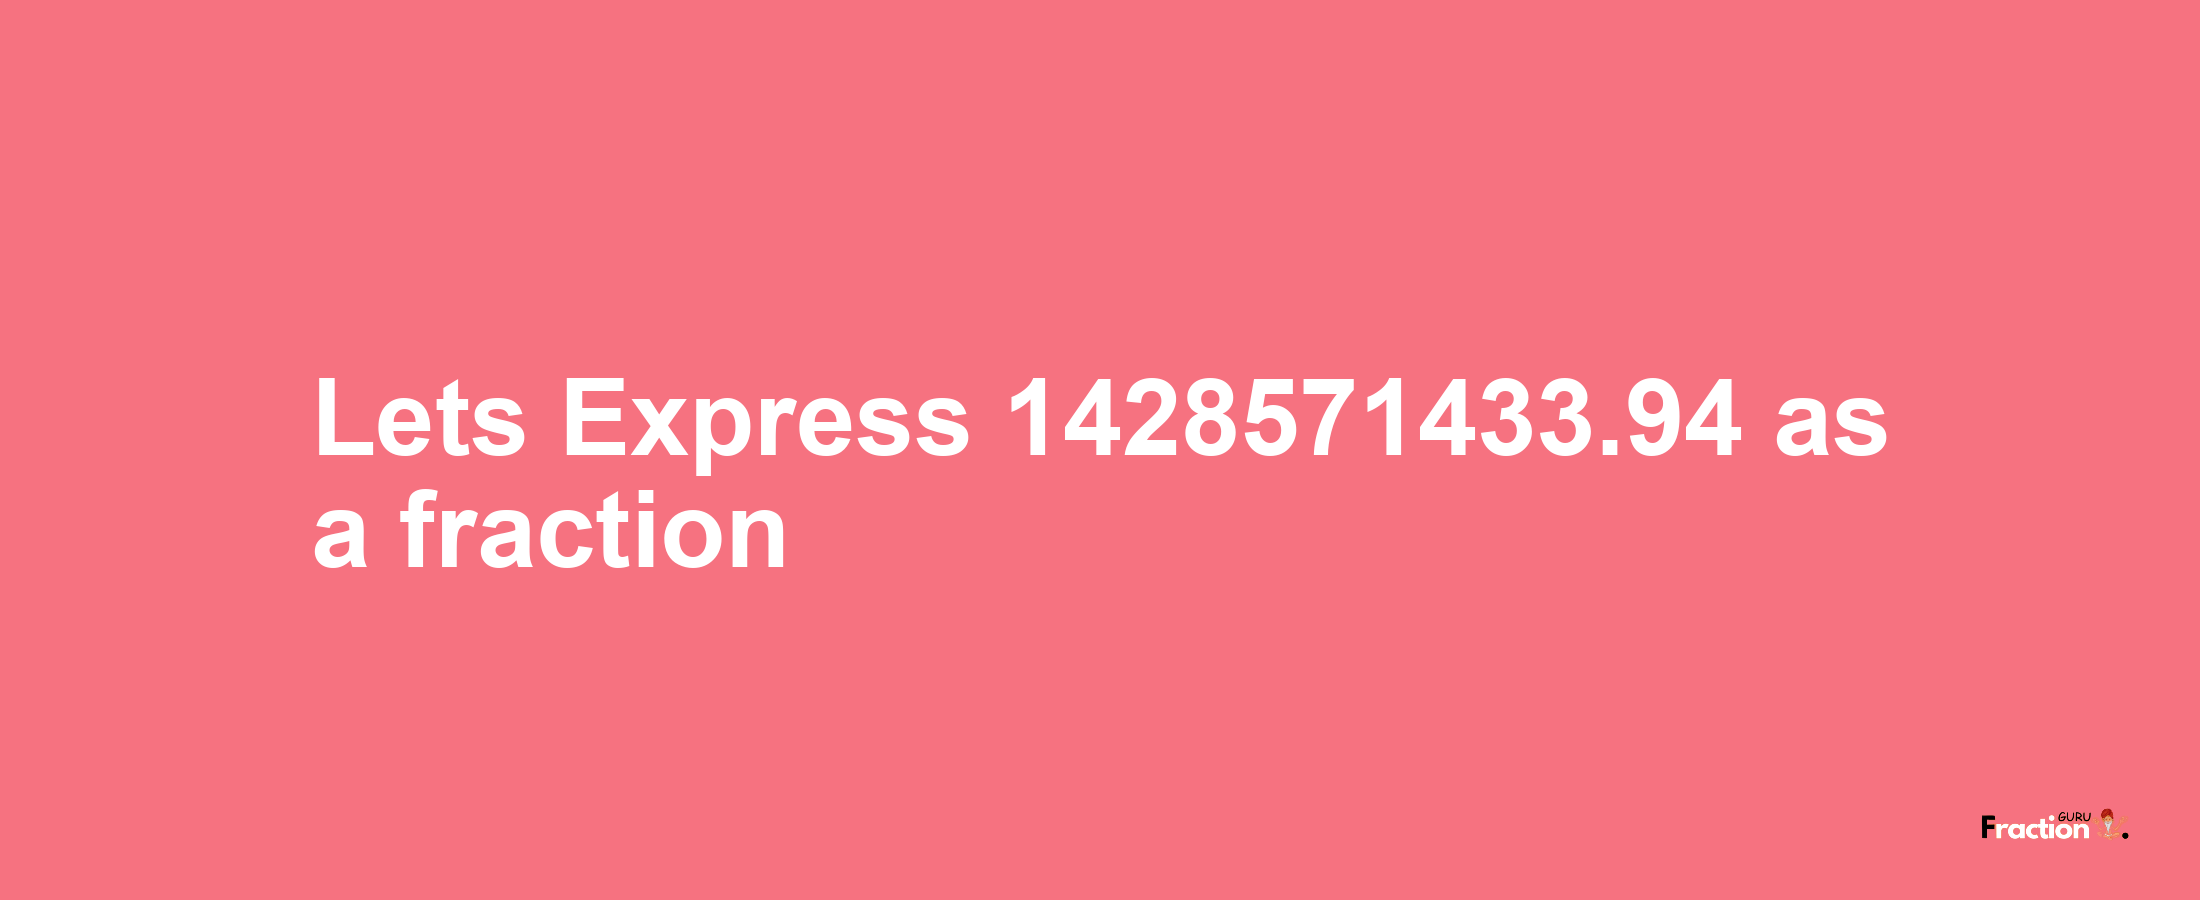 Lets Express 1428571433.94 as afraction